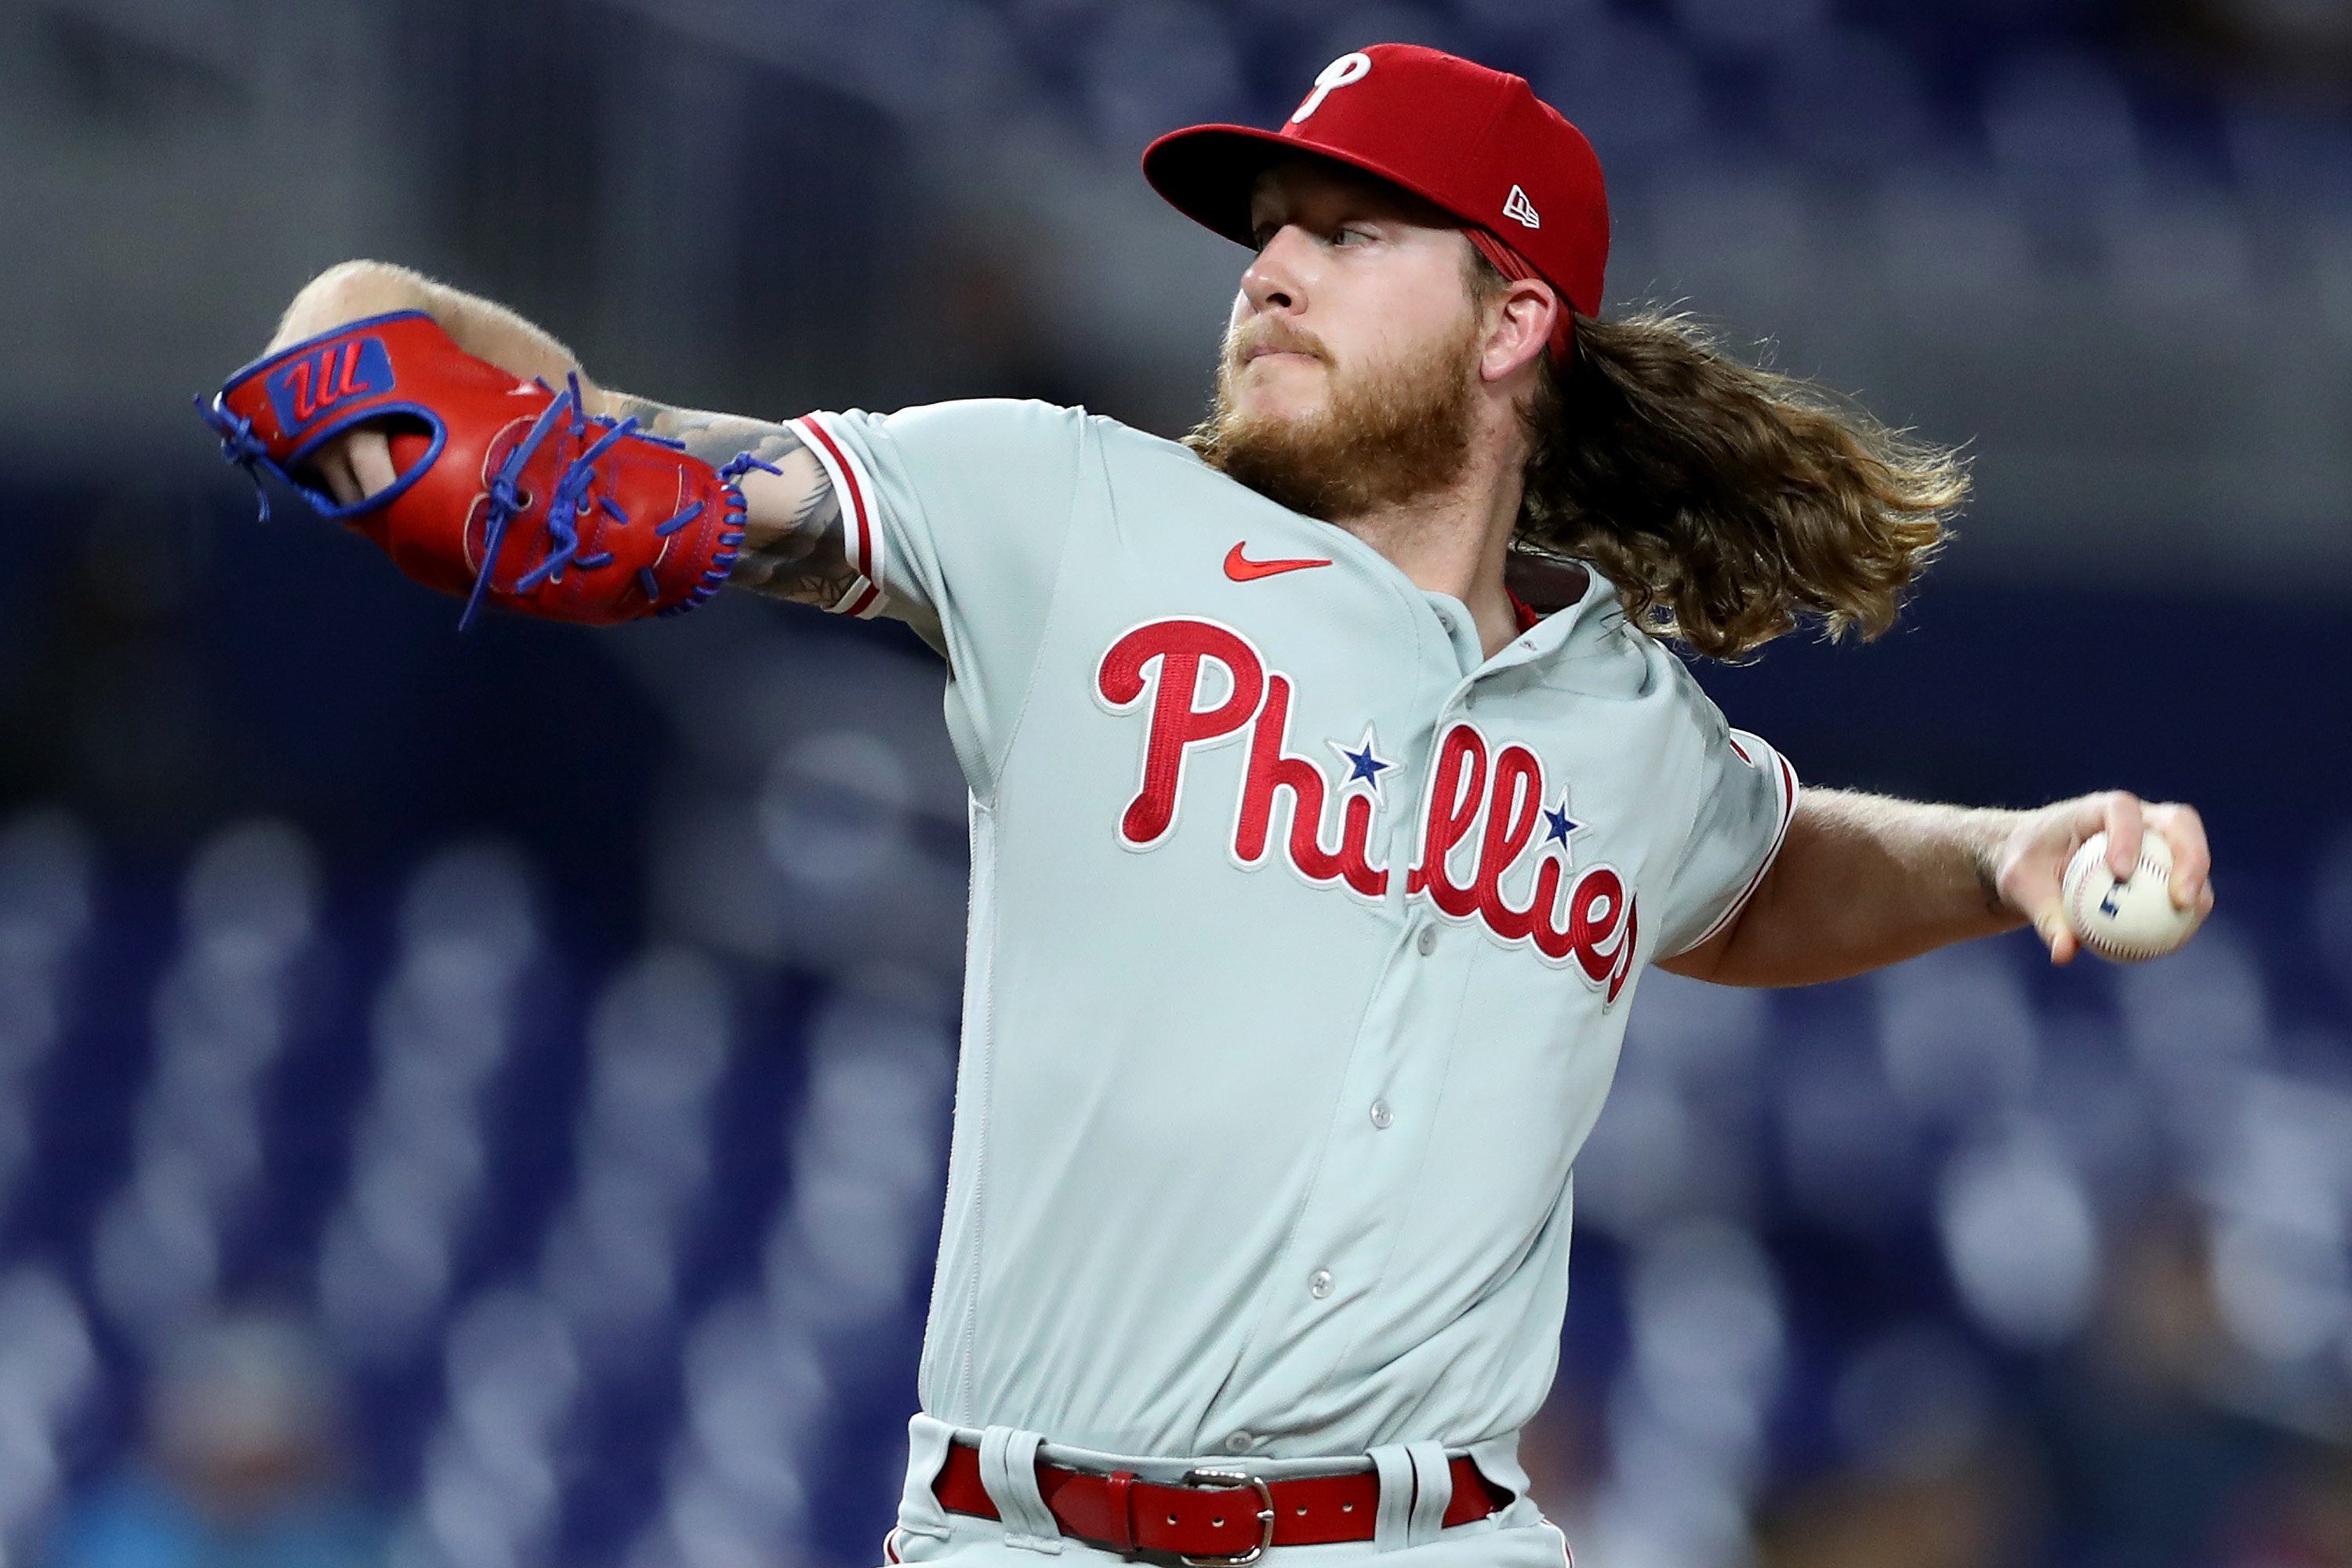 Nick Maton's clutch homer leads Phillies past Alcántara's Marlins   Phillies Nation - Your source for Philadelphia Phillies news, opinion,  history, rumors, events, and other fun stuff.